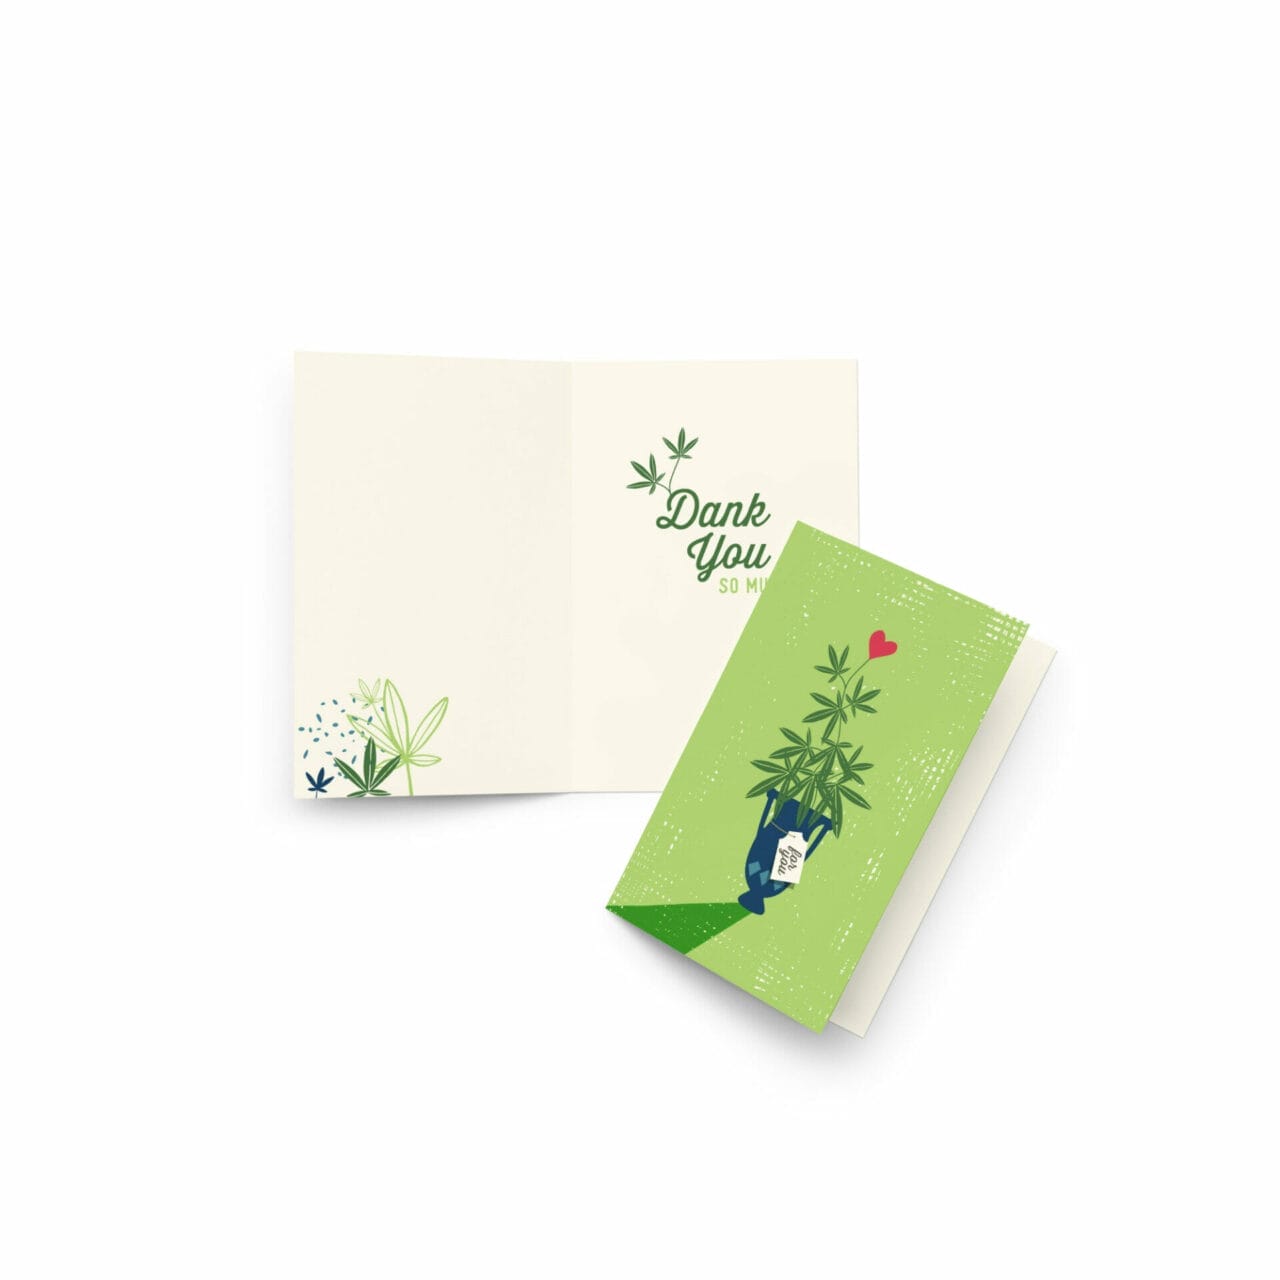 GHC "Thank You" Greeting card